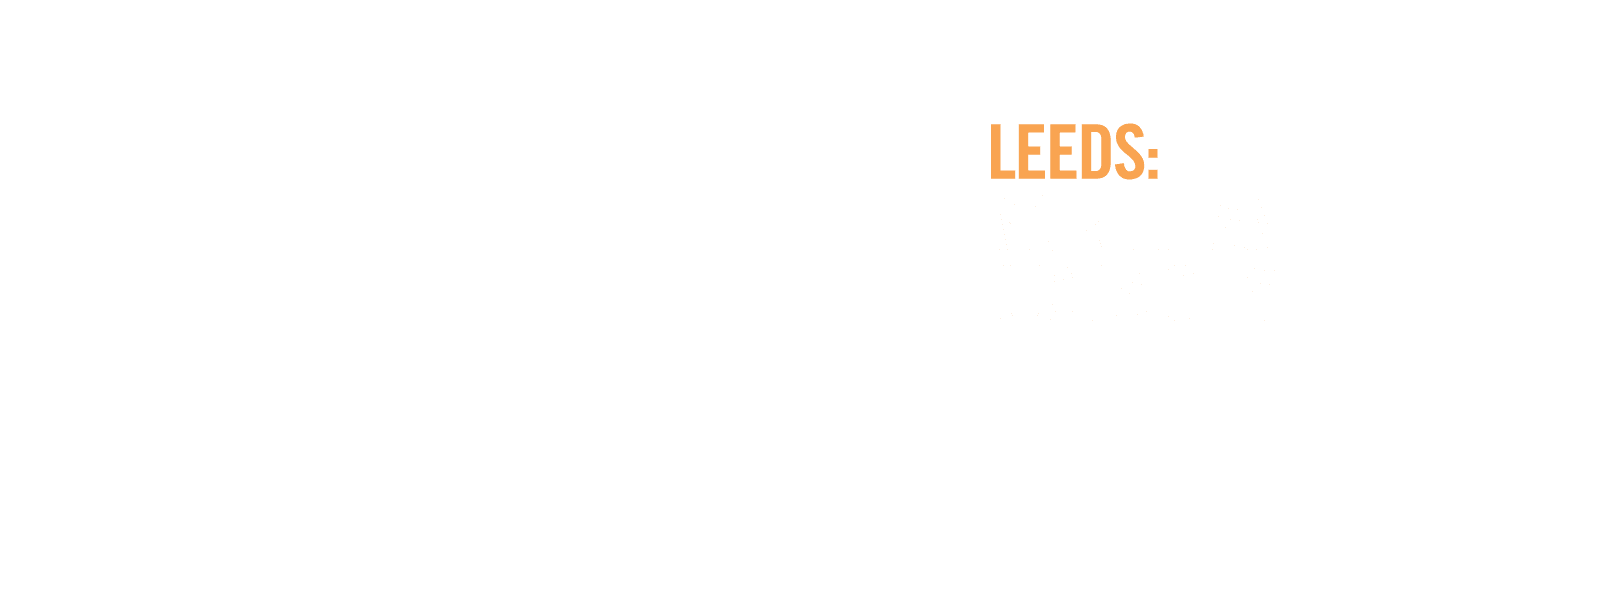 Leeds: More than just a city